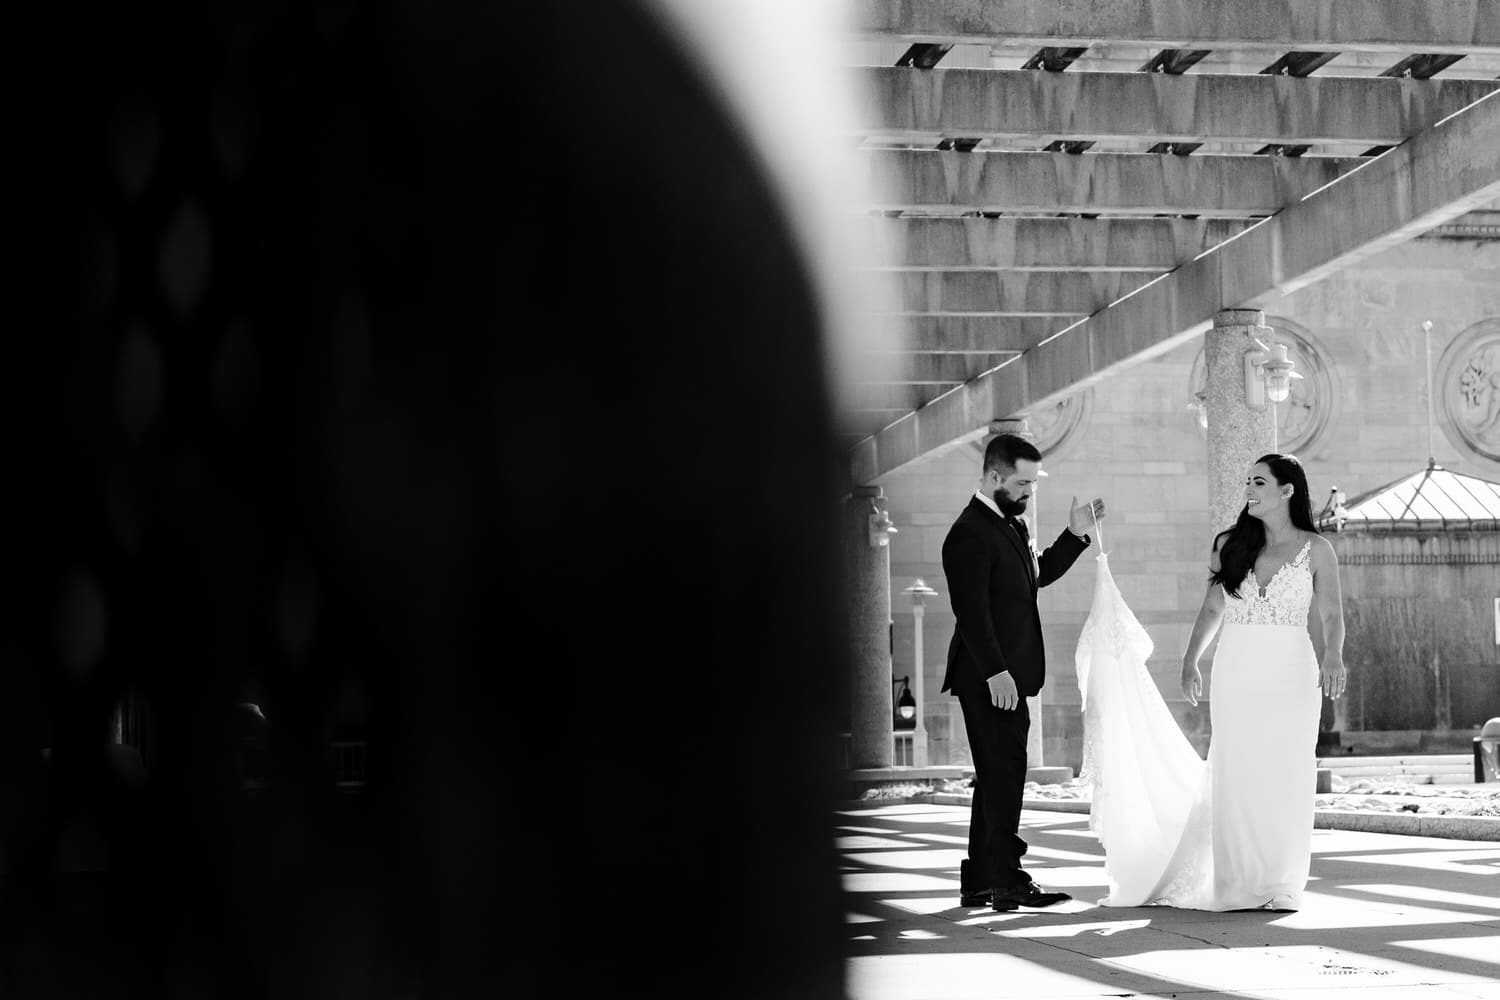 A candid black and white picture of a groom picking up the train of his bride's wedding gown. 